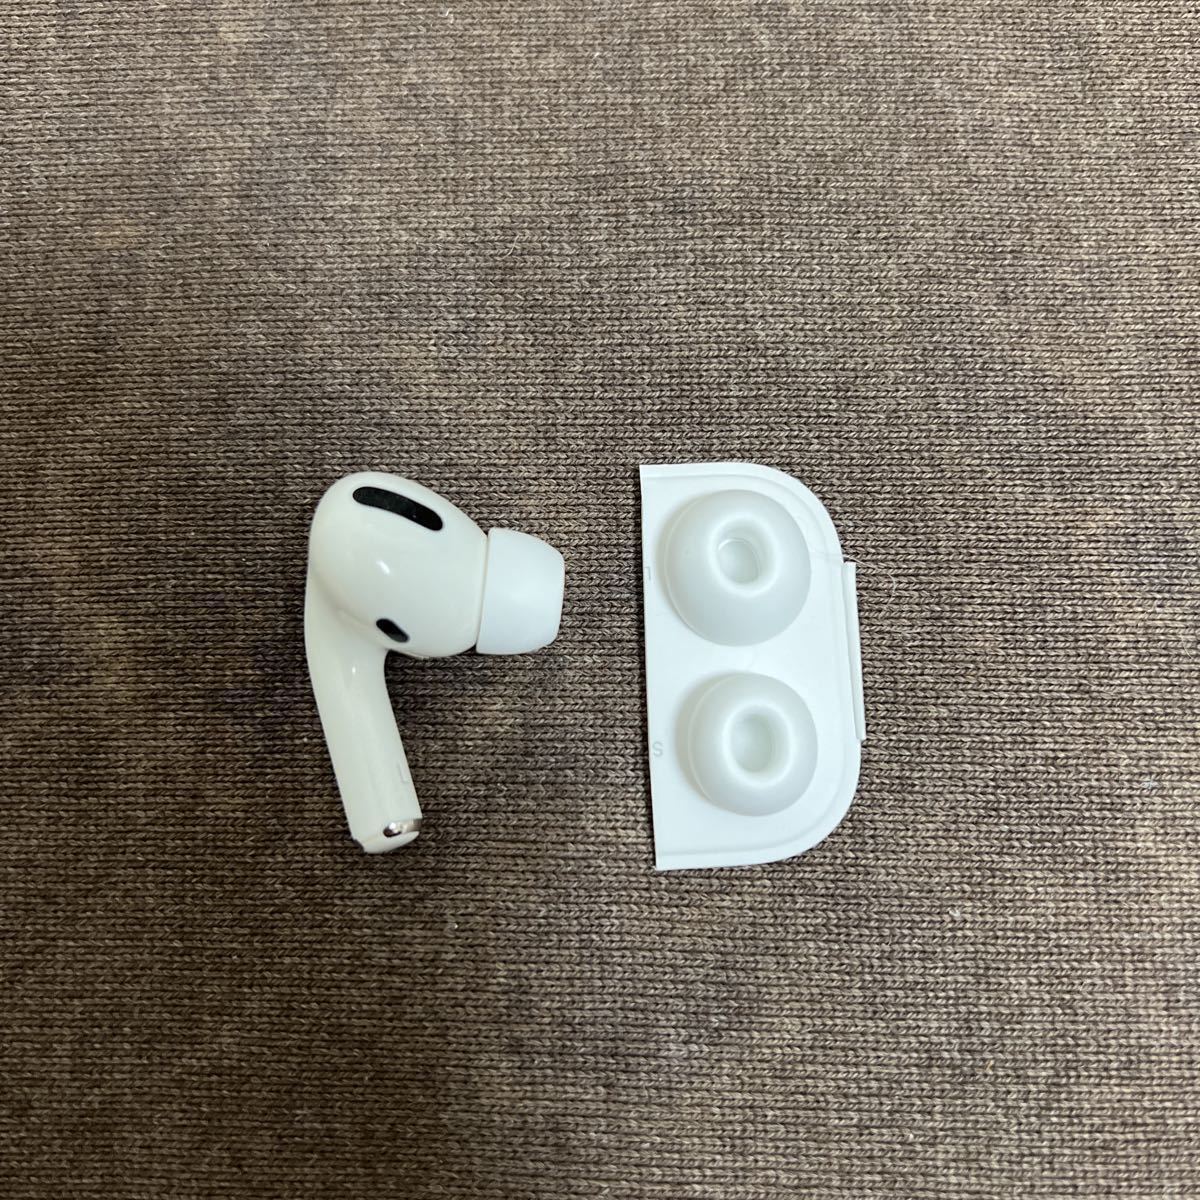 Apple純正 AirPods Pro 左 イヤホン MWP22J/A 左耳のみ 新品未使用品 bpbd.kendalkab.go.id